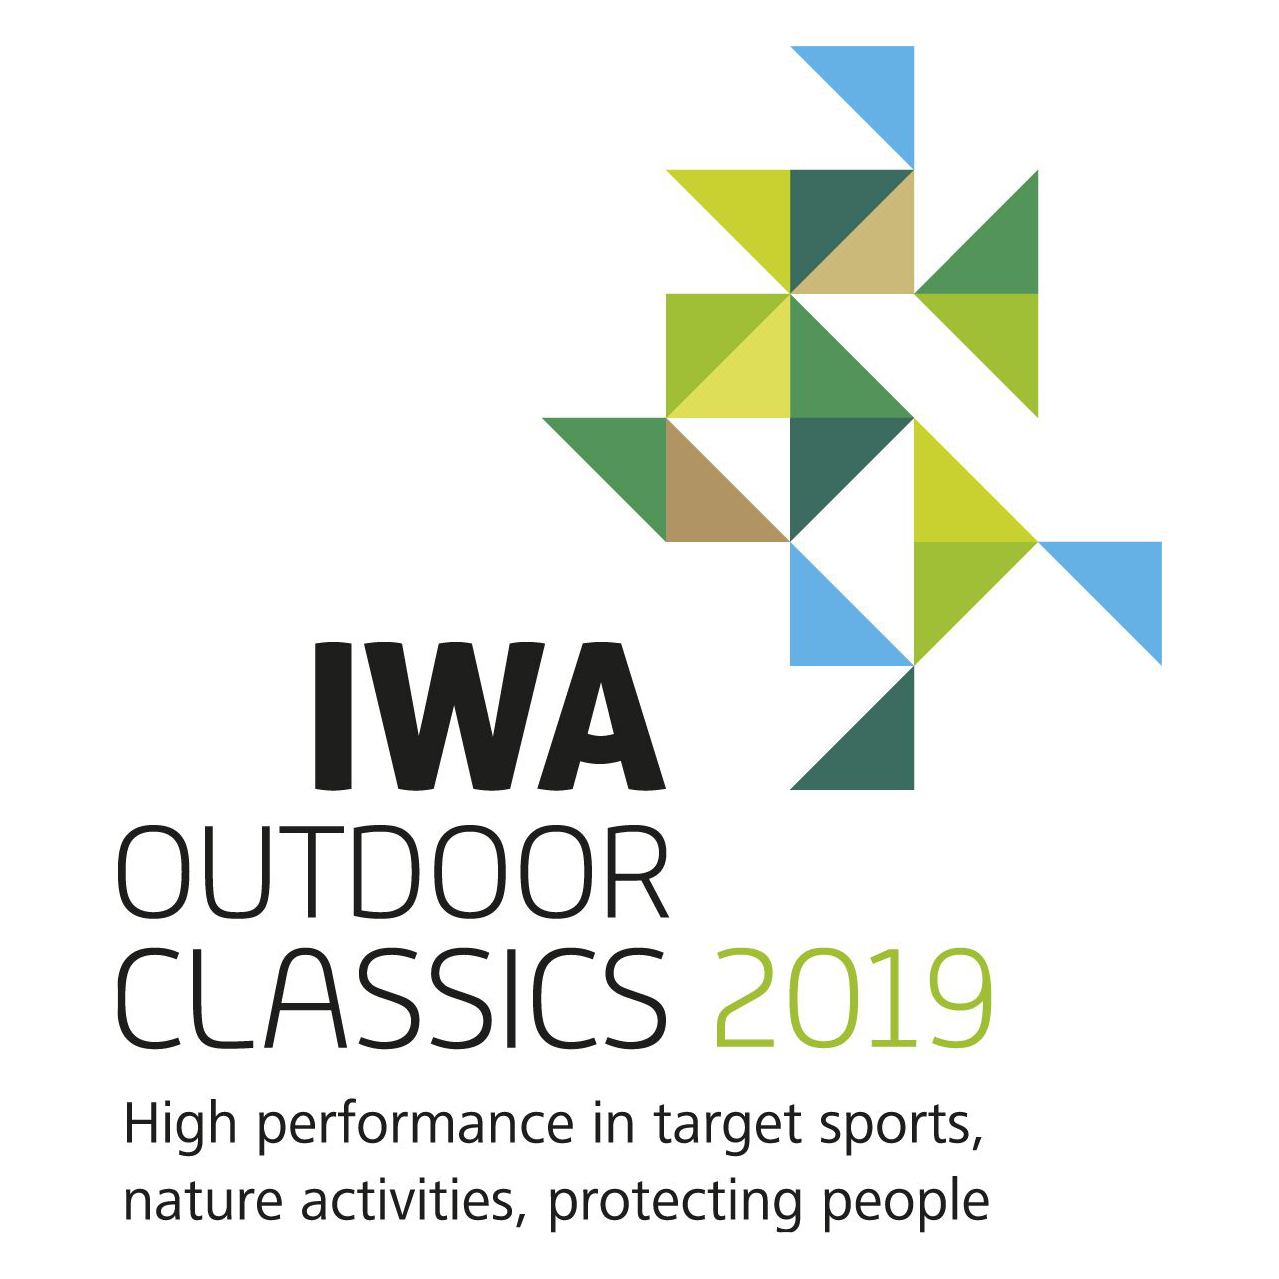 Meet Sport Quantum at IWA 2019 in Nuremberg – 8th to 11th March